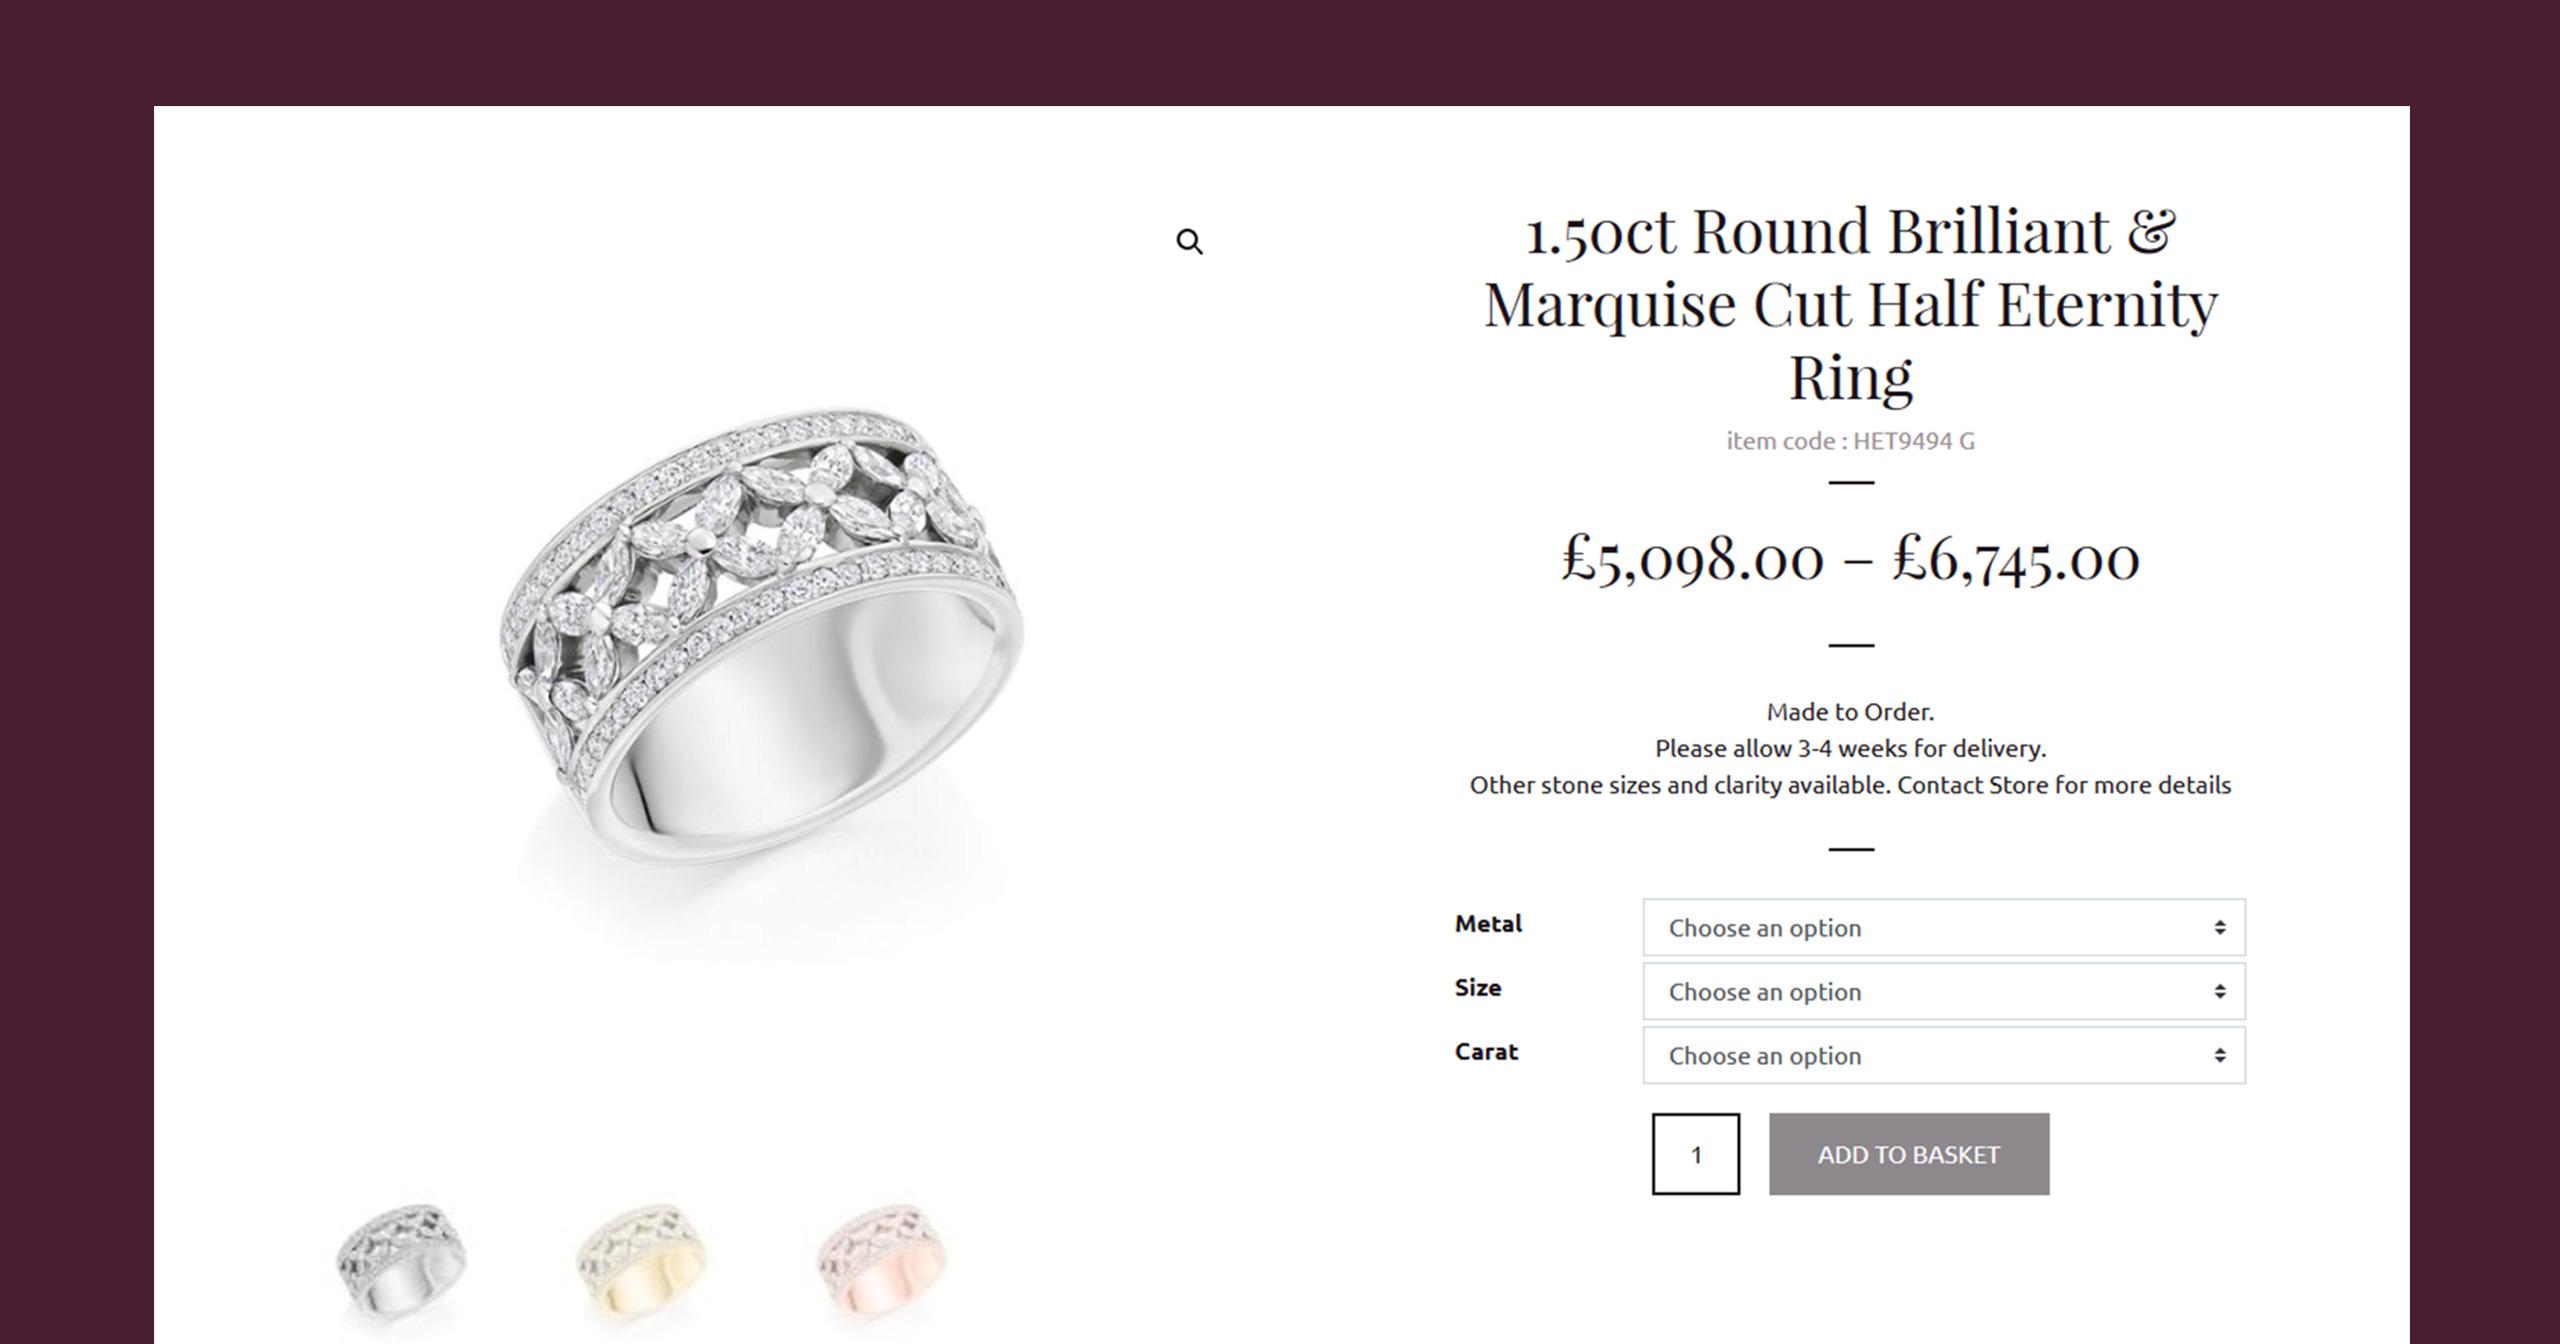 Product page design for Jenny Jones Jewellery - UX/UI design and purchase journey - API and Secure Payment Integrations